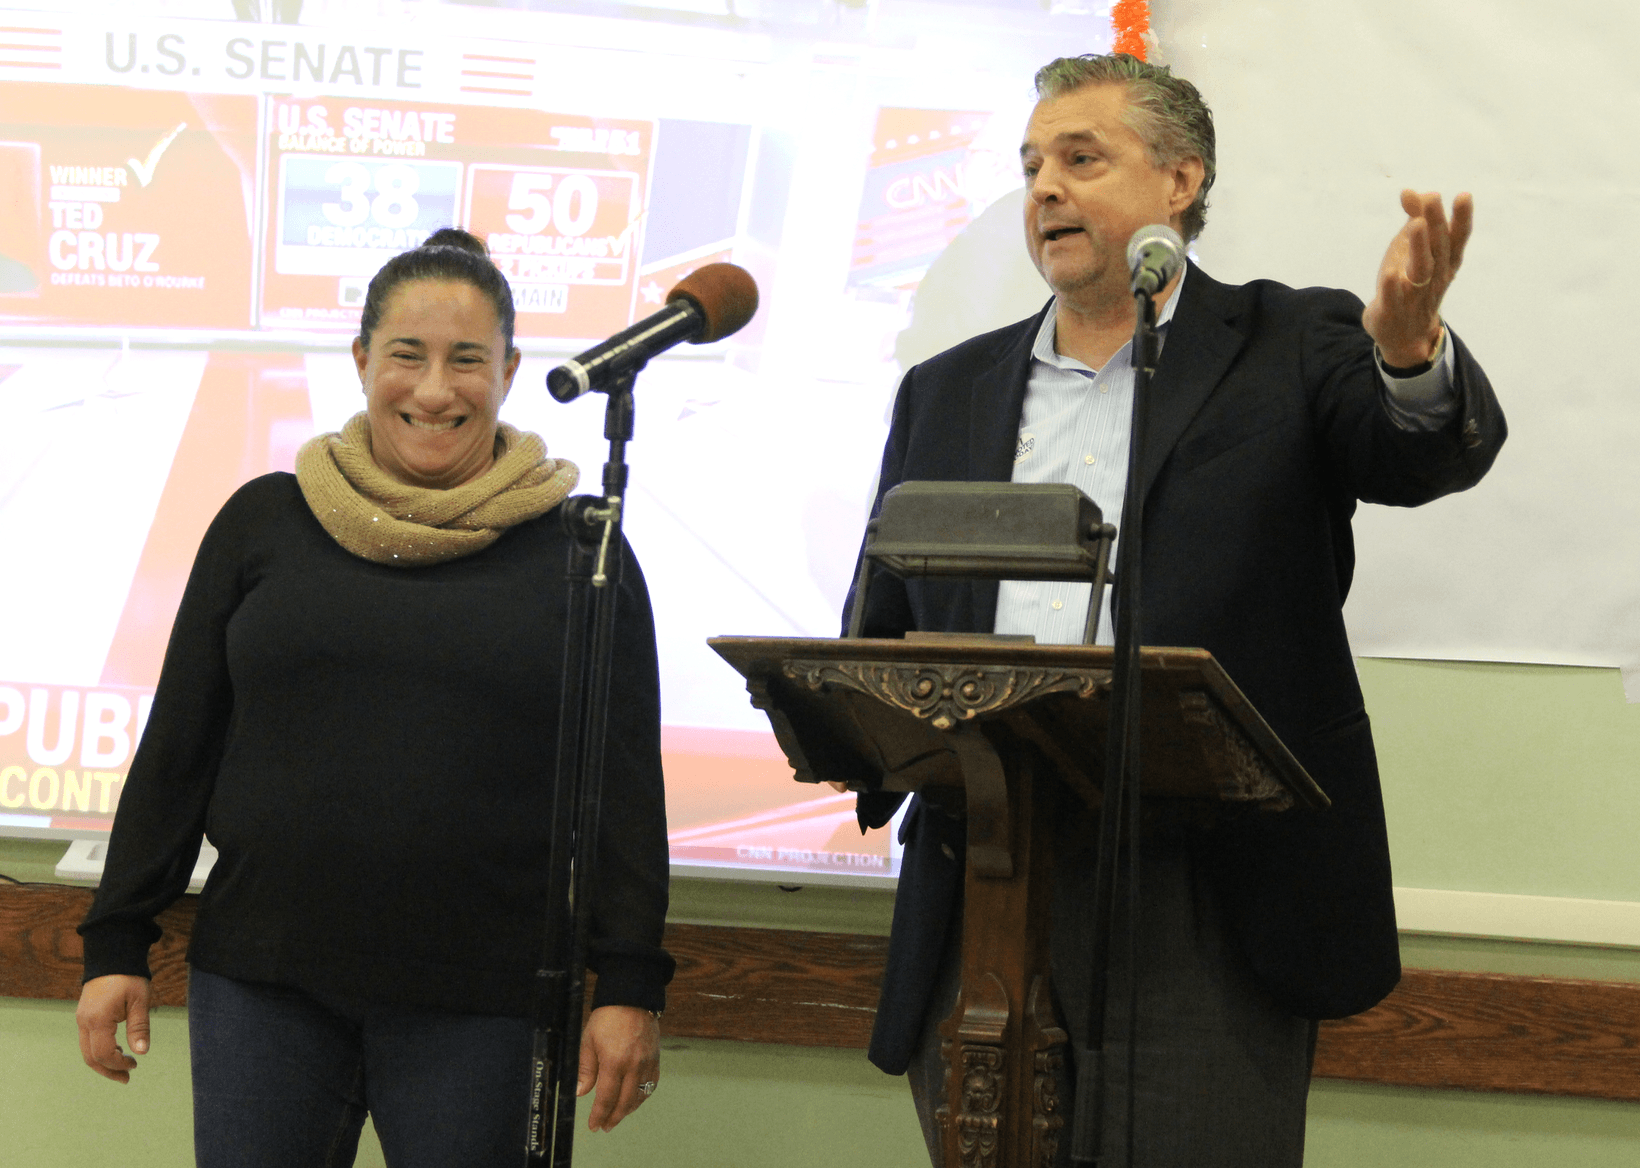 Tony Turner, head of the DTC, congratulates Laura Kostin on a hard fought campaign against Fred Camillo. Nov 6, 2018 Photo: Leslie Yager